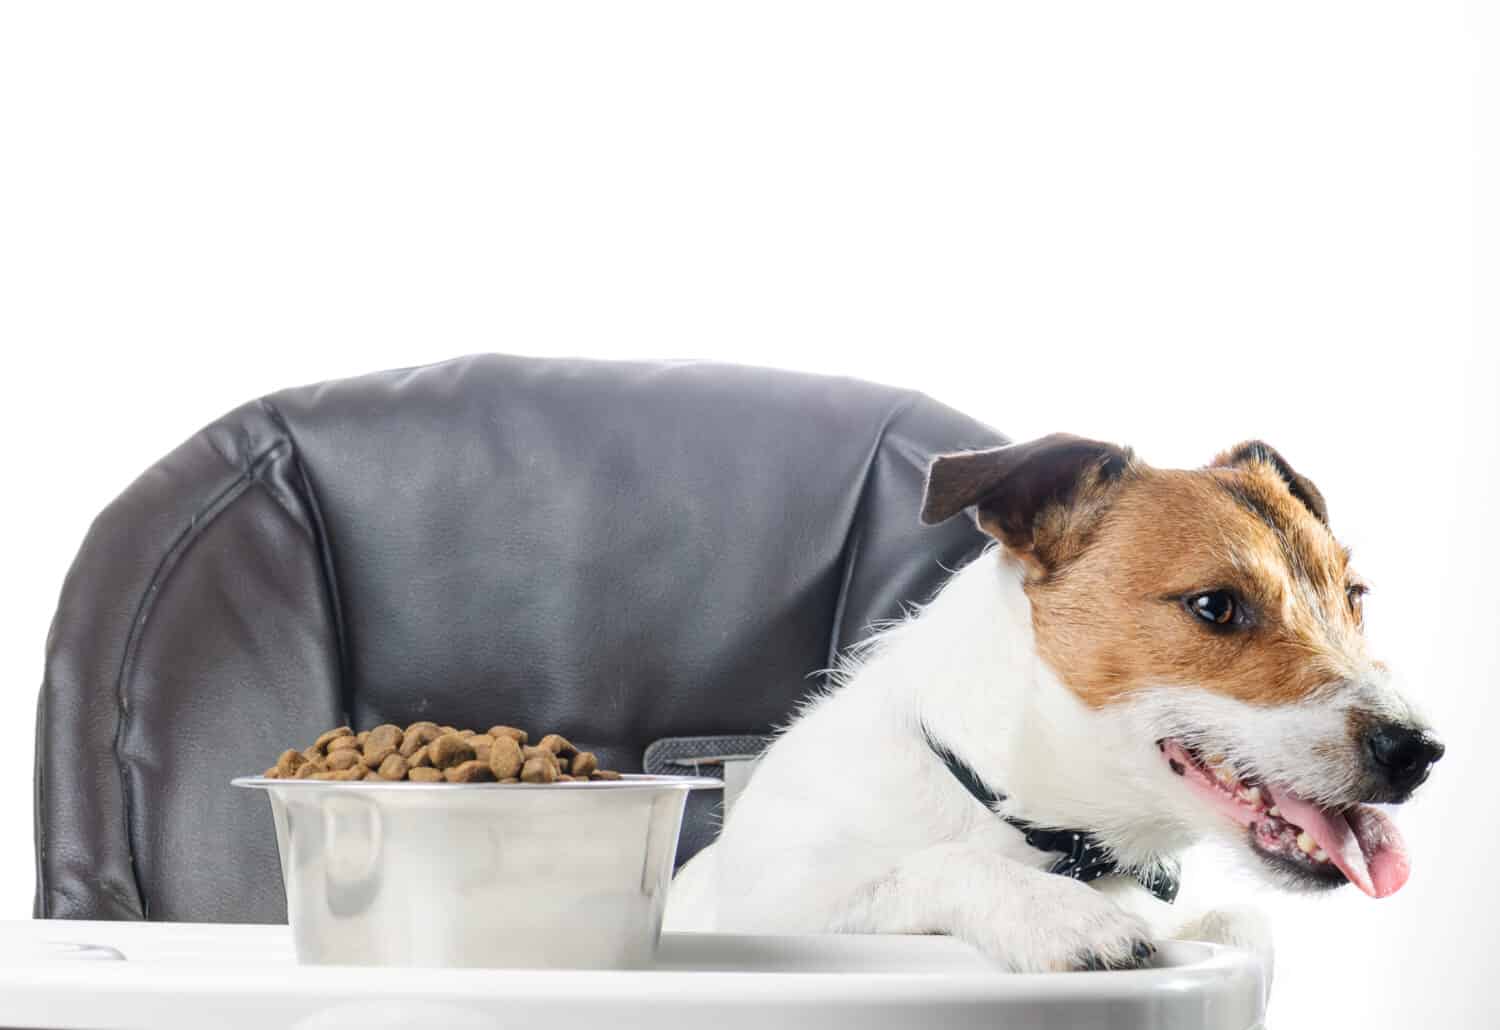 Dog don't like food in bowl and refusing to eat